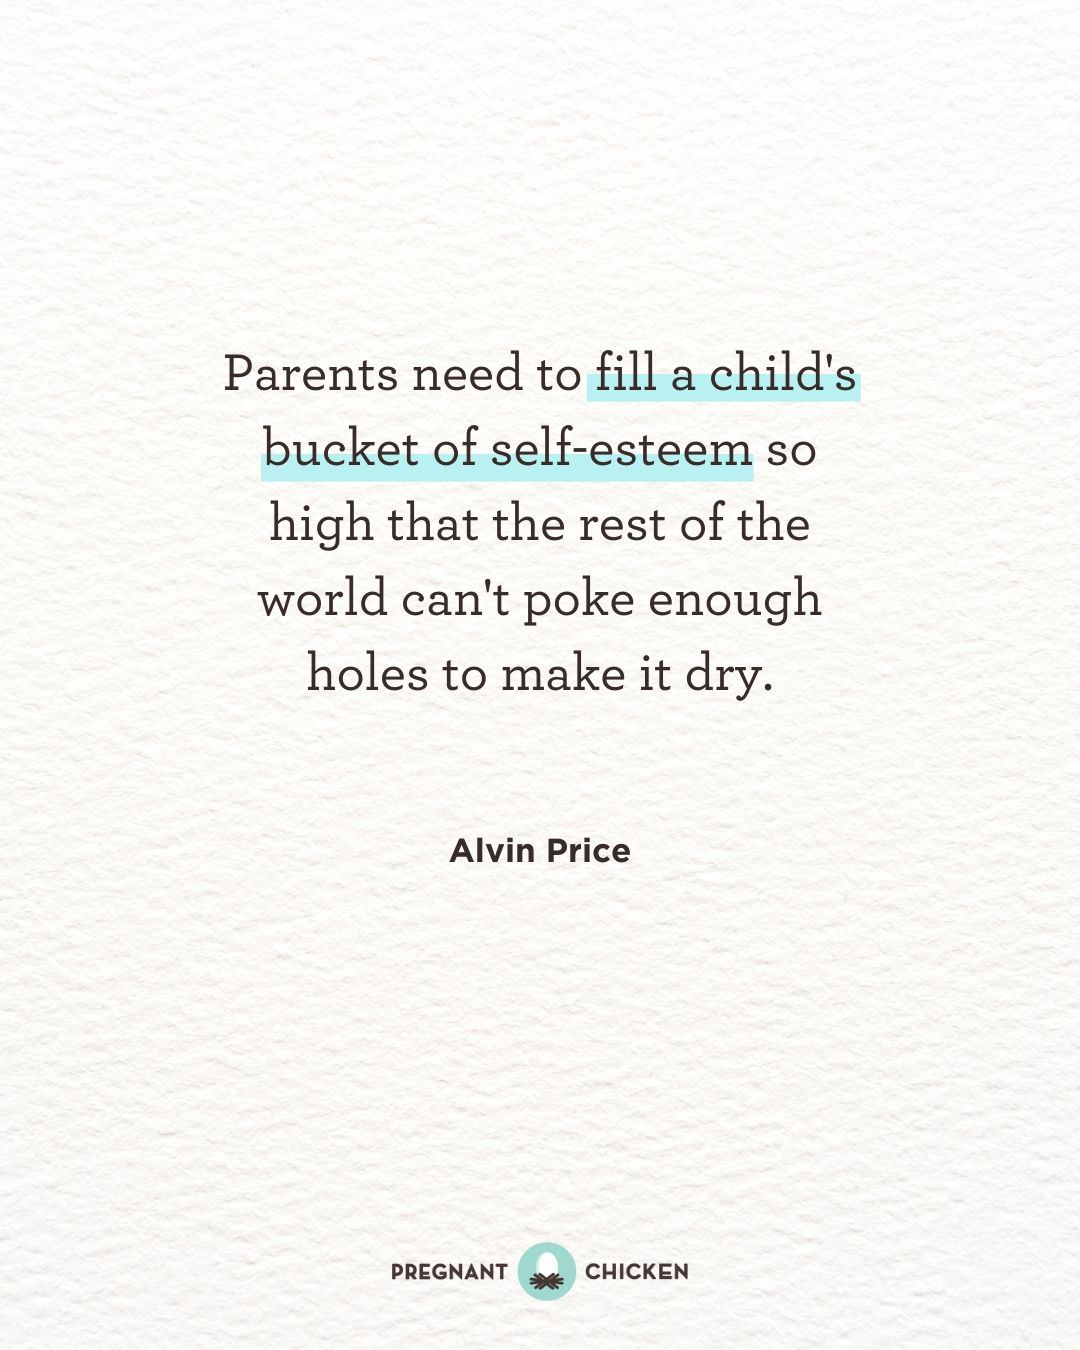 Parents need to fill a child's bucket of self-esteem so high that the rest of the world can't poke enough holes to make it dry.